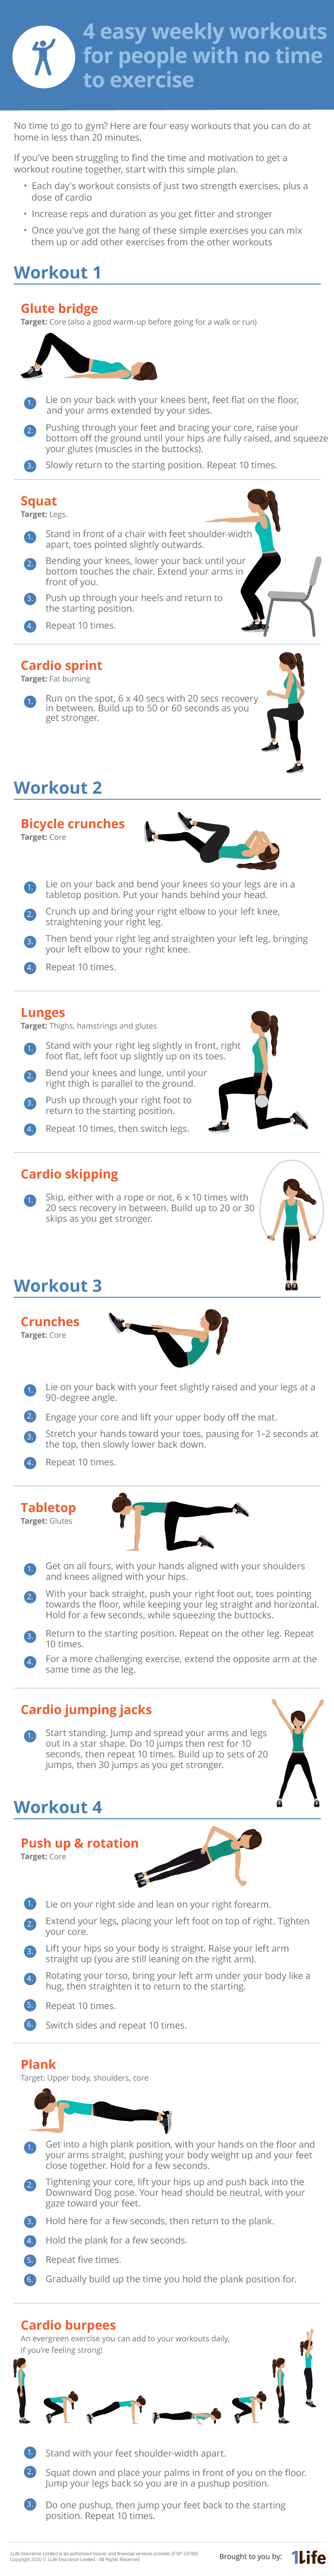 4 easy weekly workouts for people with no time to excercise